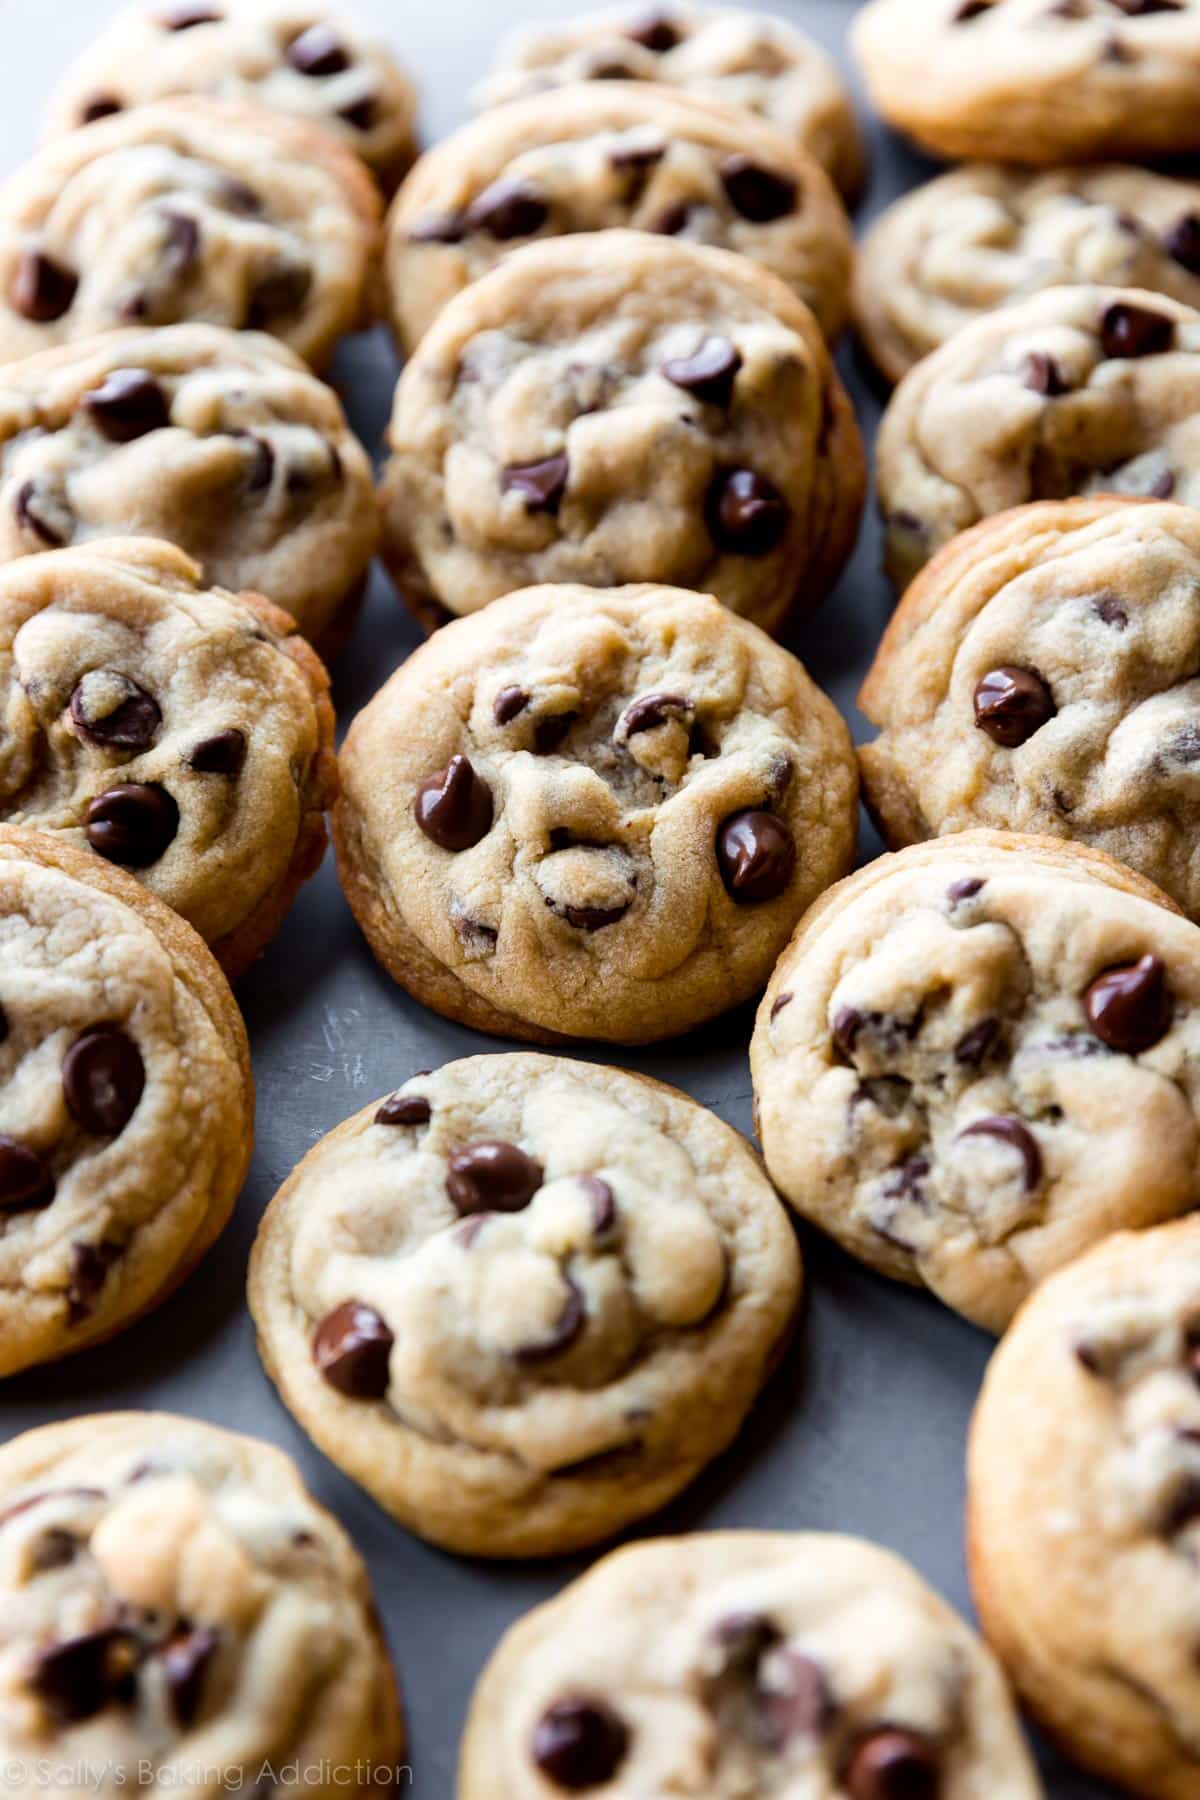 Rows of chocolate chip cookies